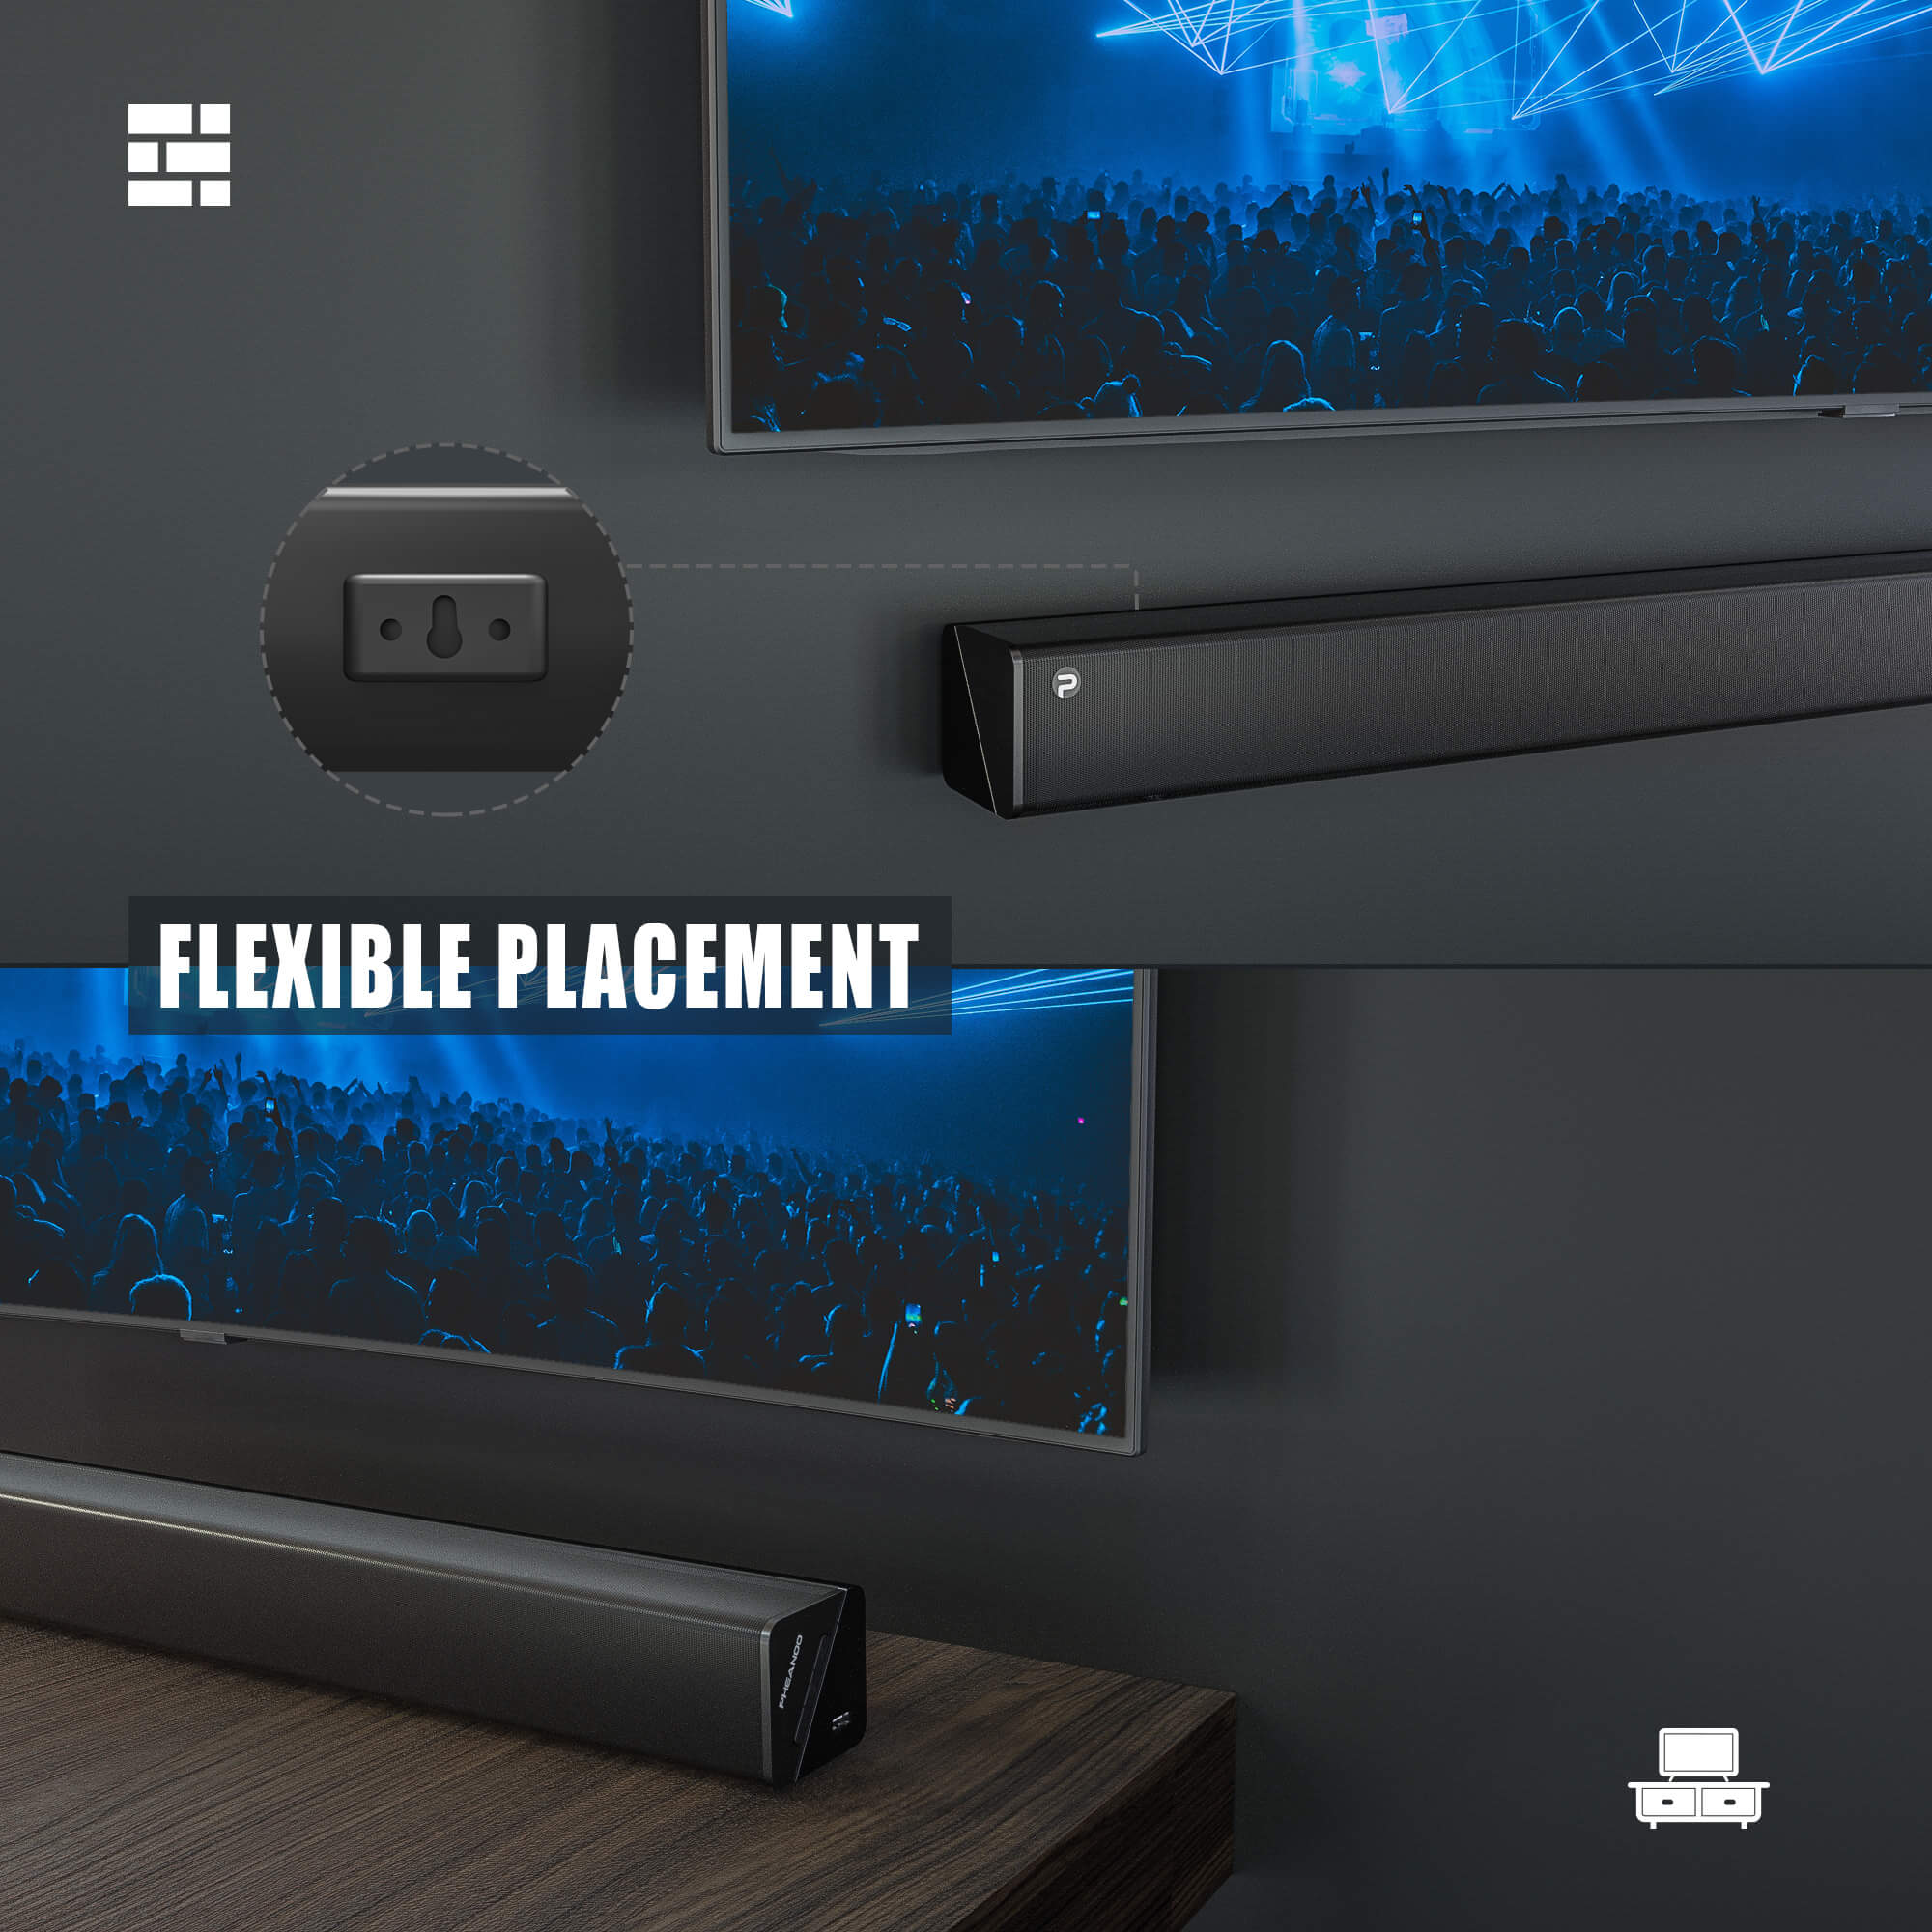 Pheanoo Audio Ltd Distributes Innovative Sound Bar Systems with Subwoofer to Enhance the Level Of Entertainment In Residential and Commercial Premises